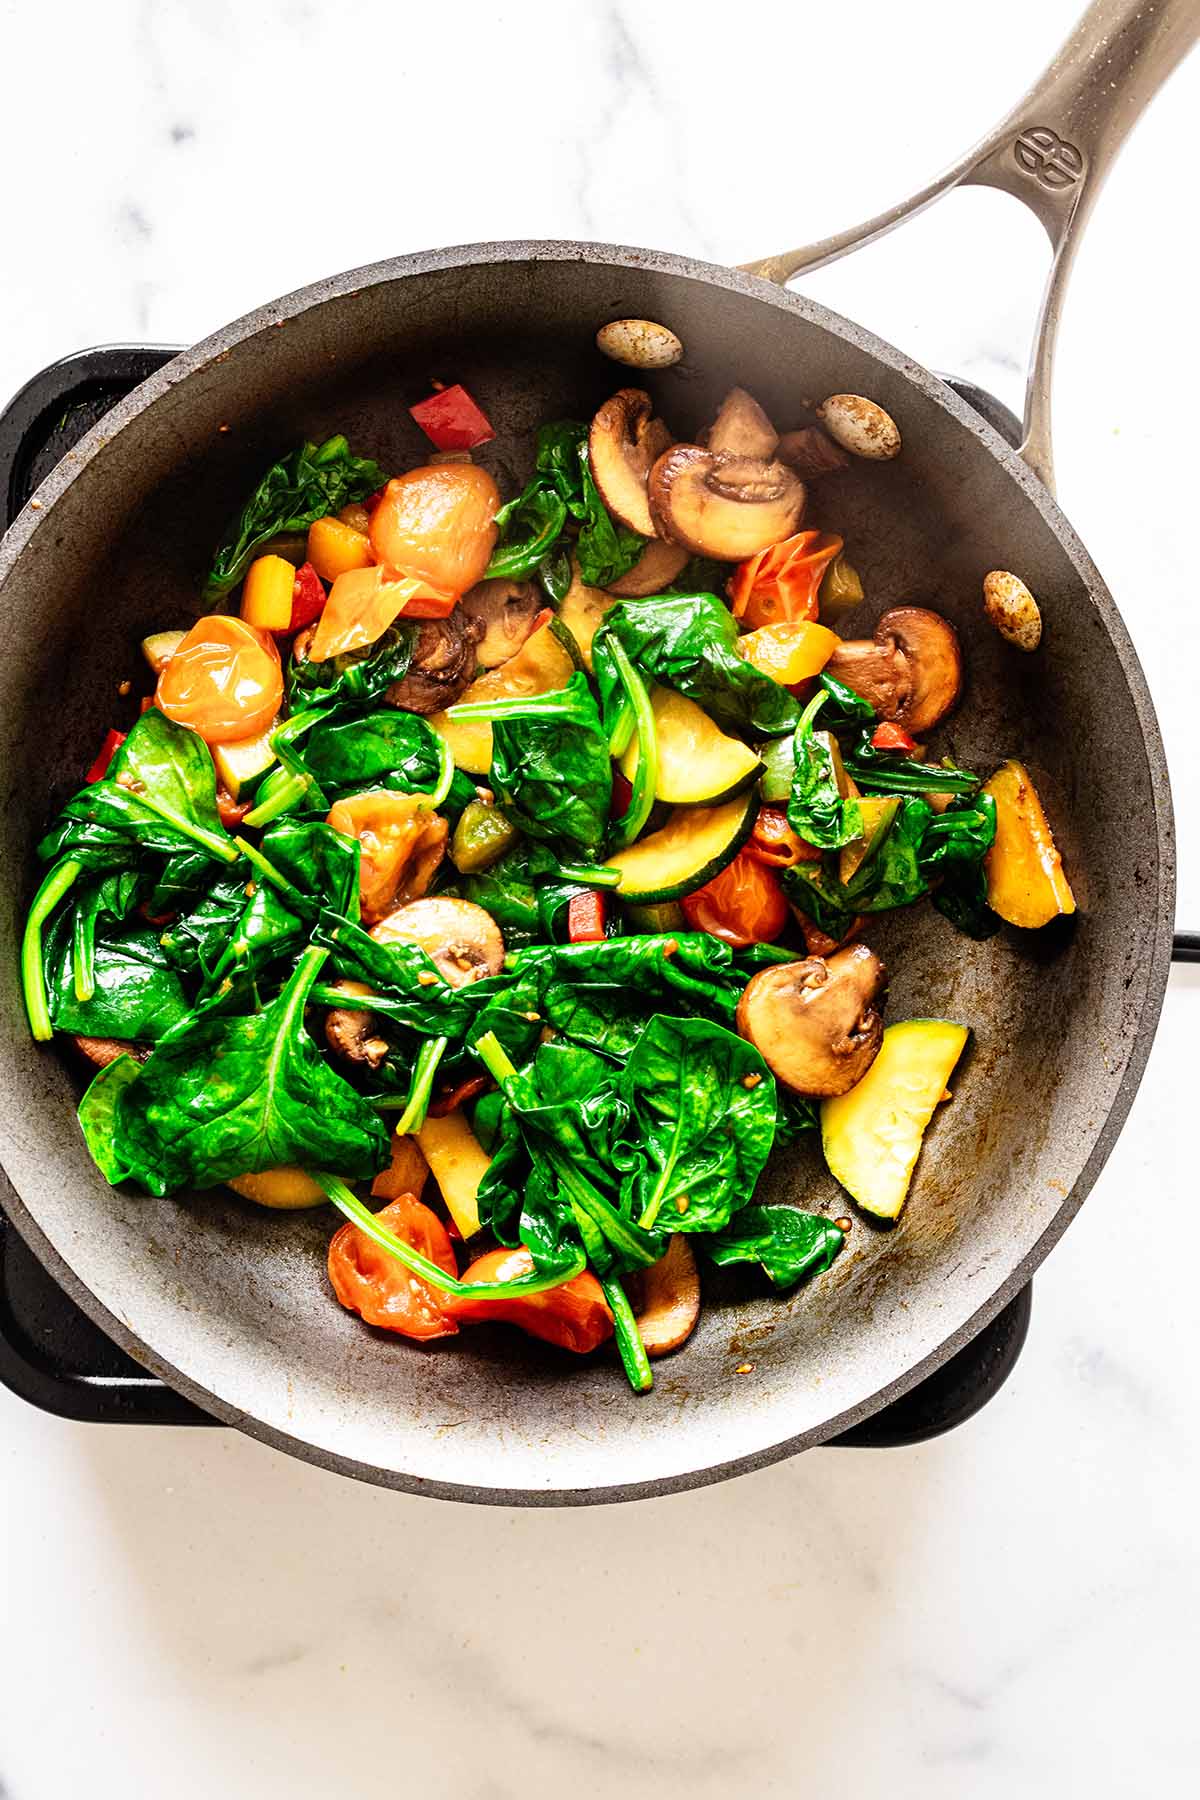 Cooked spinach and vegetables in a skillet